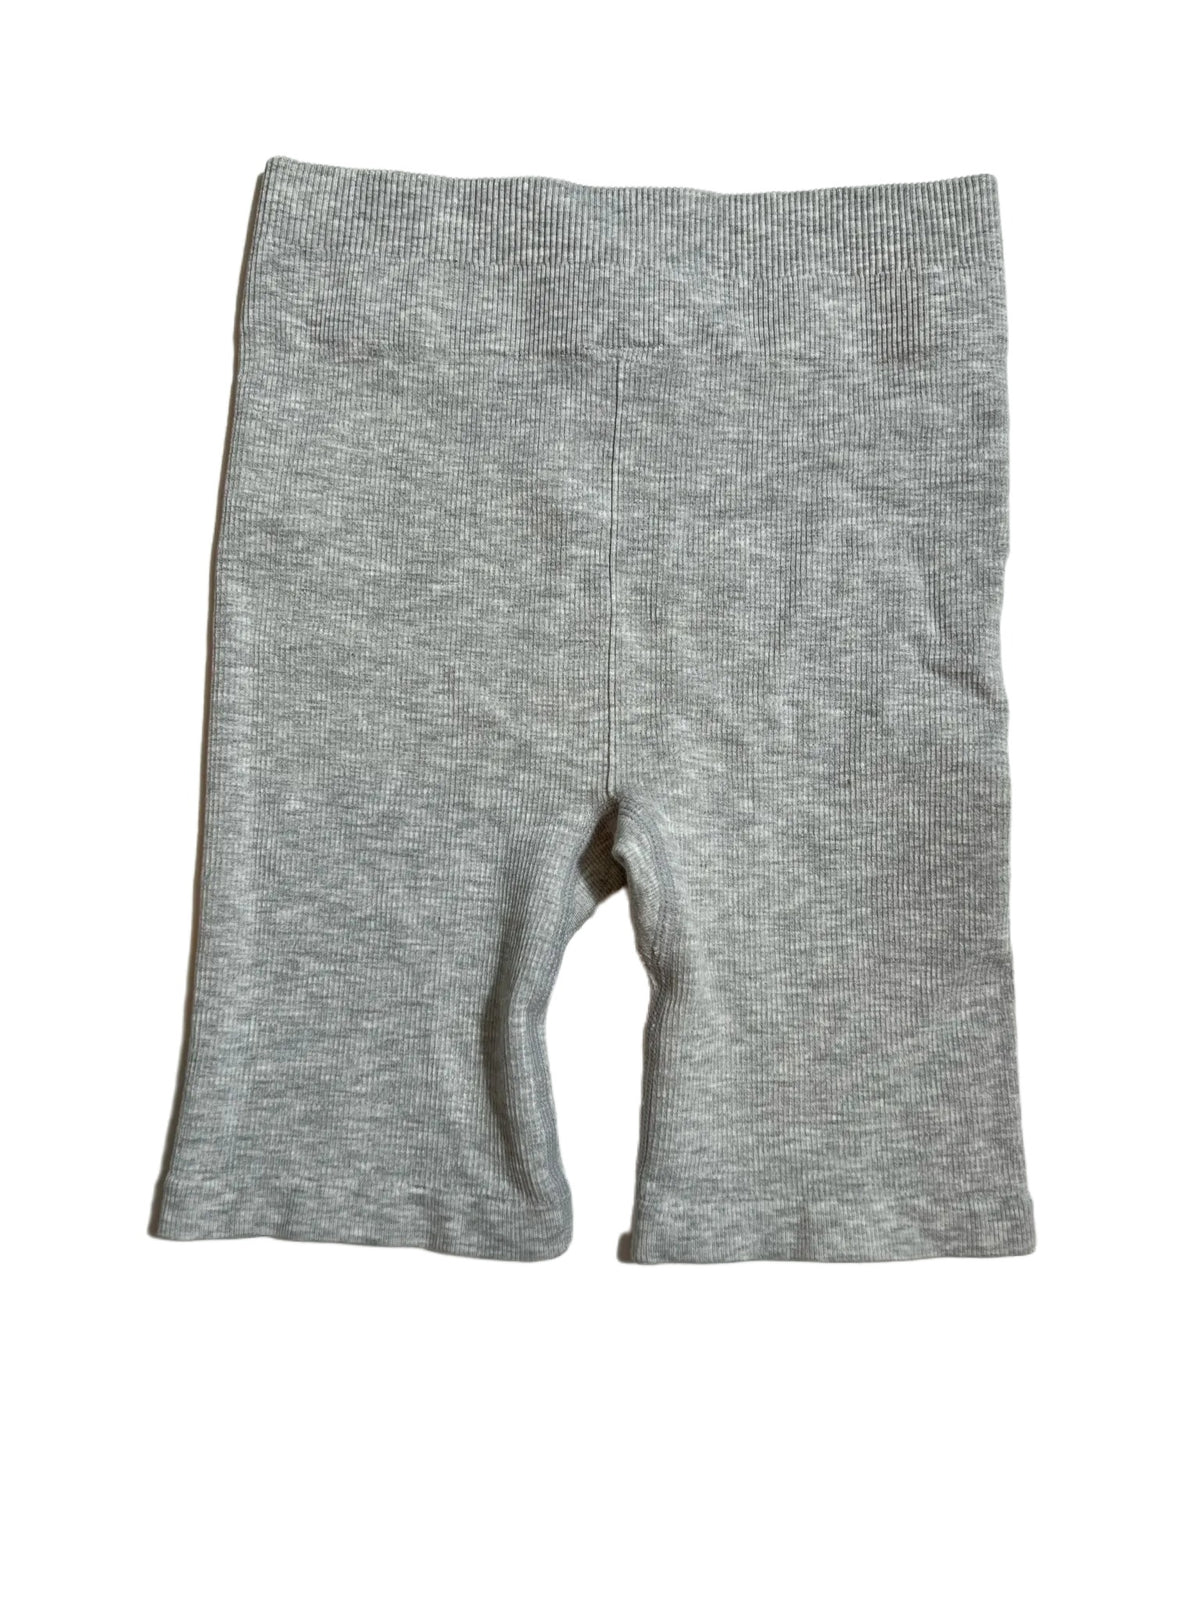 Fabletics- Grey Biker Shorts New With Tags!